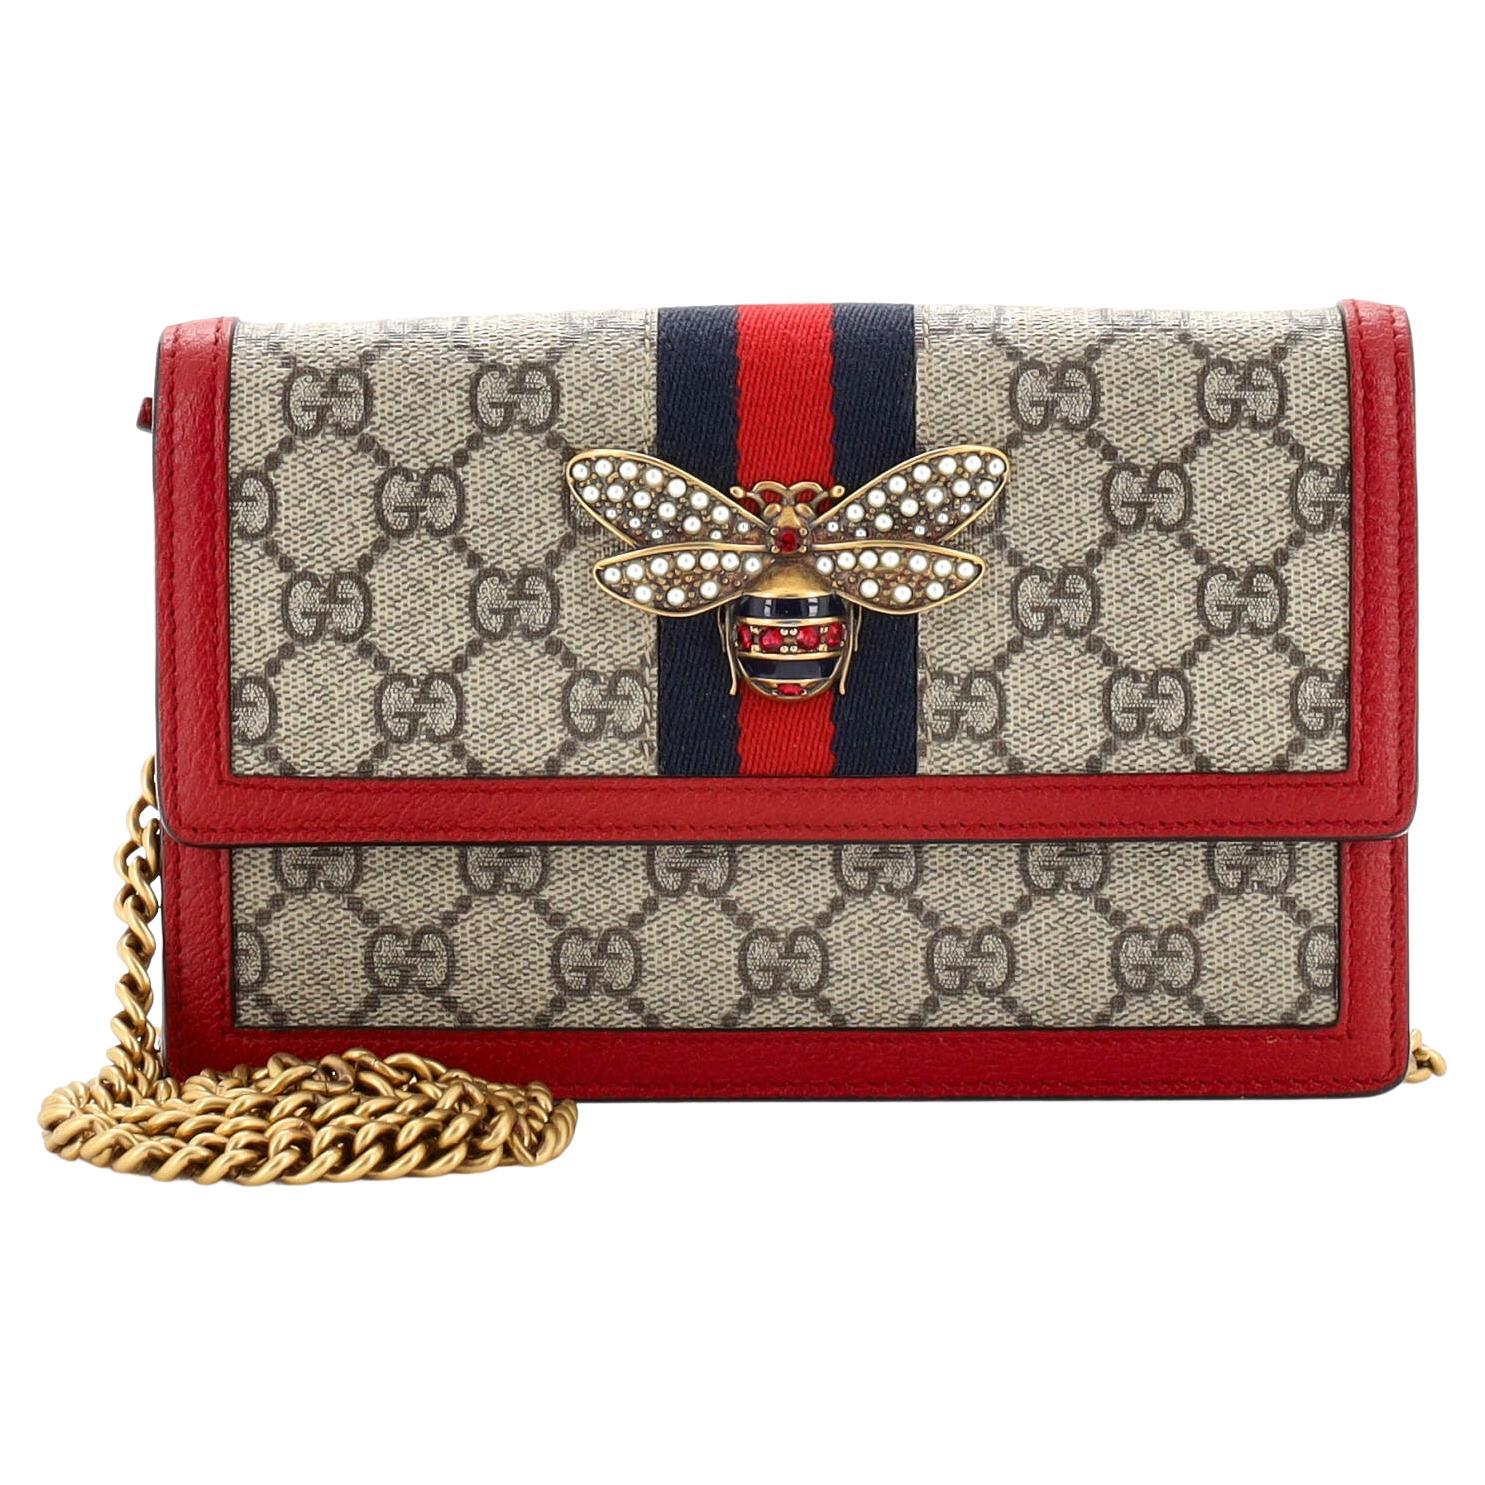 Gucci Queen Margaret Leather Shoulder Bag - Womens - Red Multi